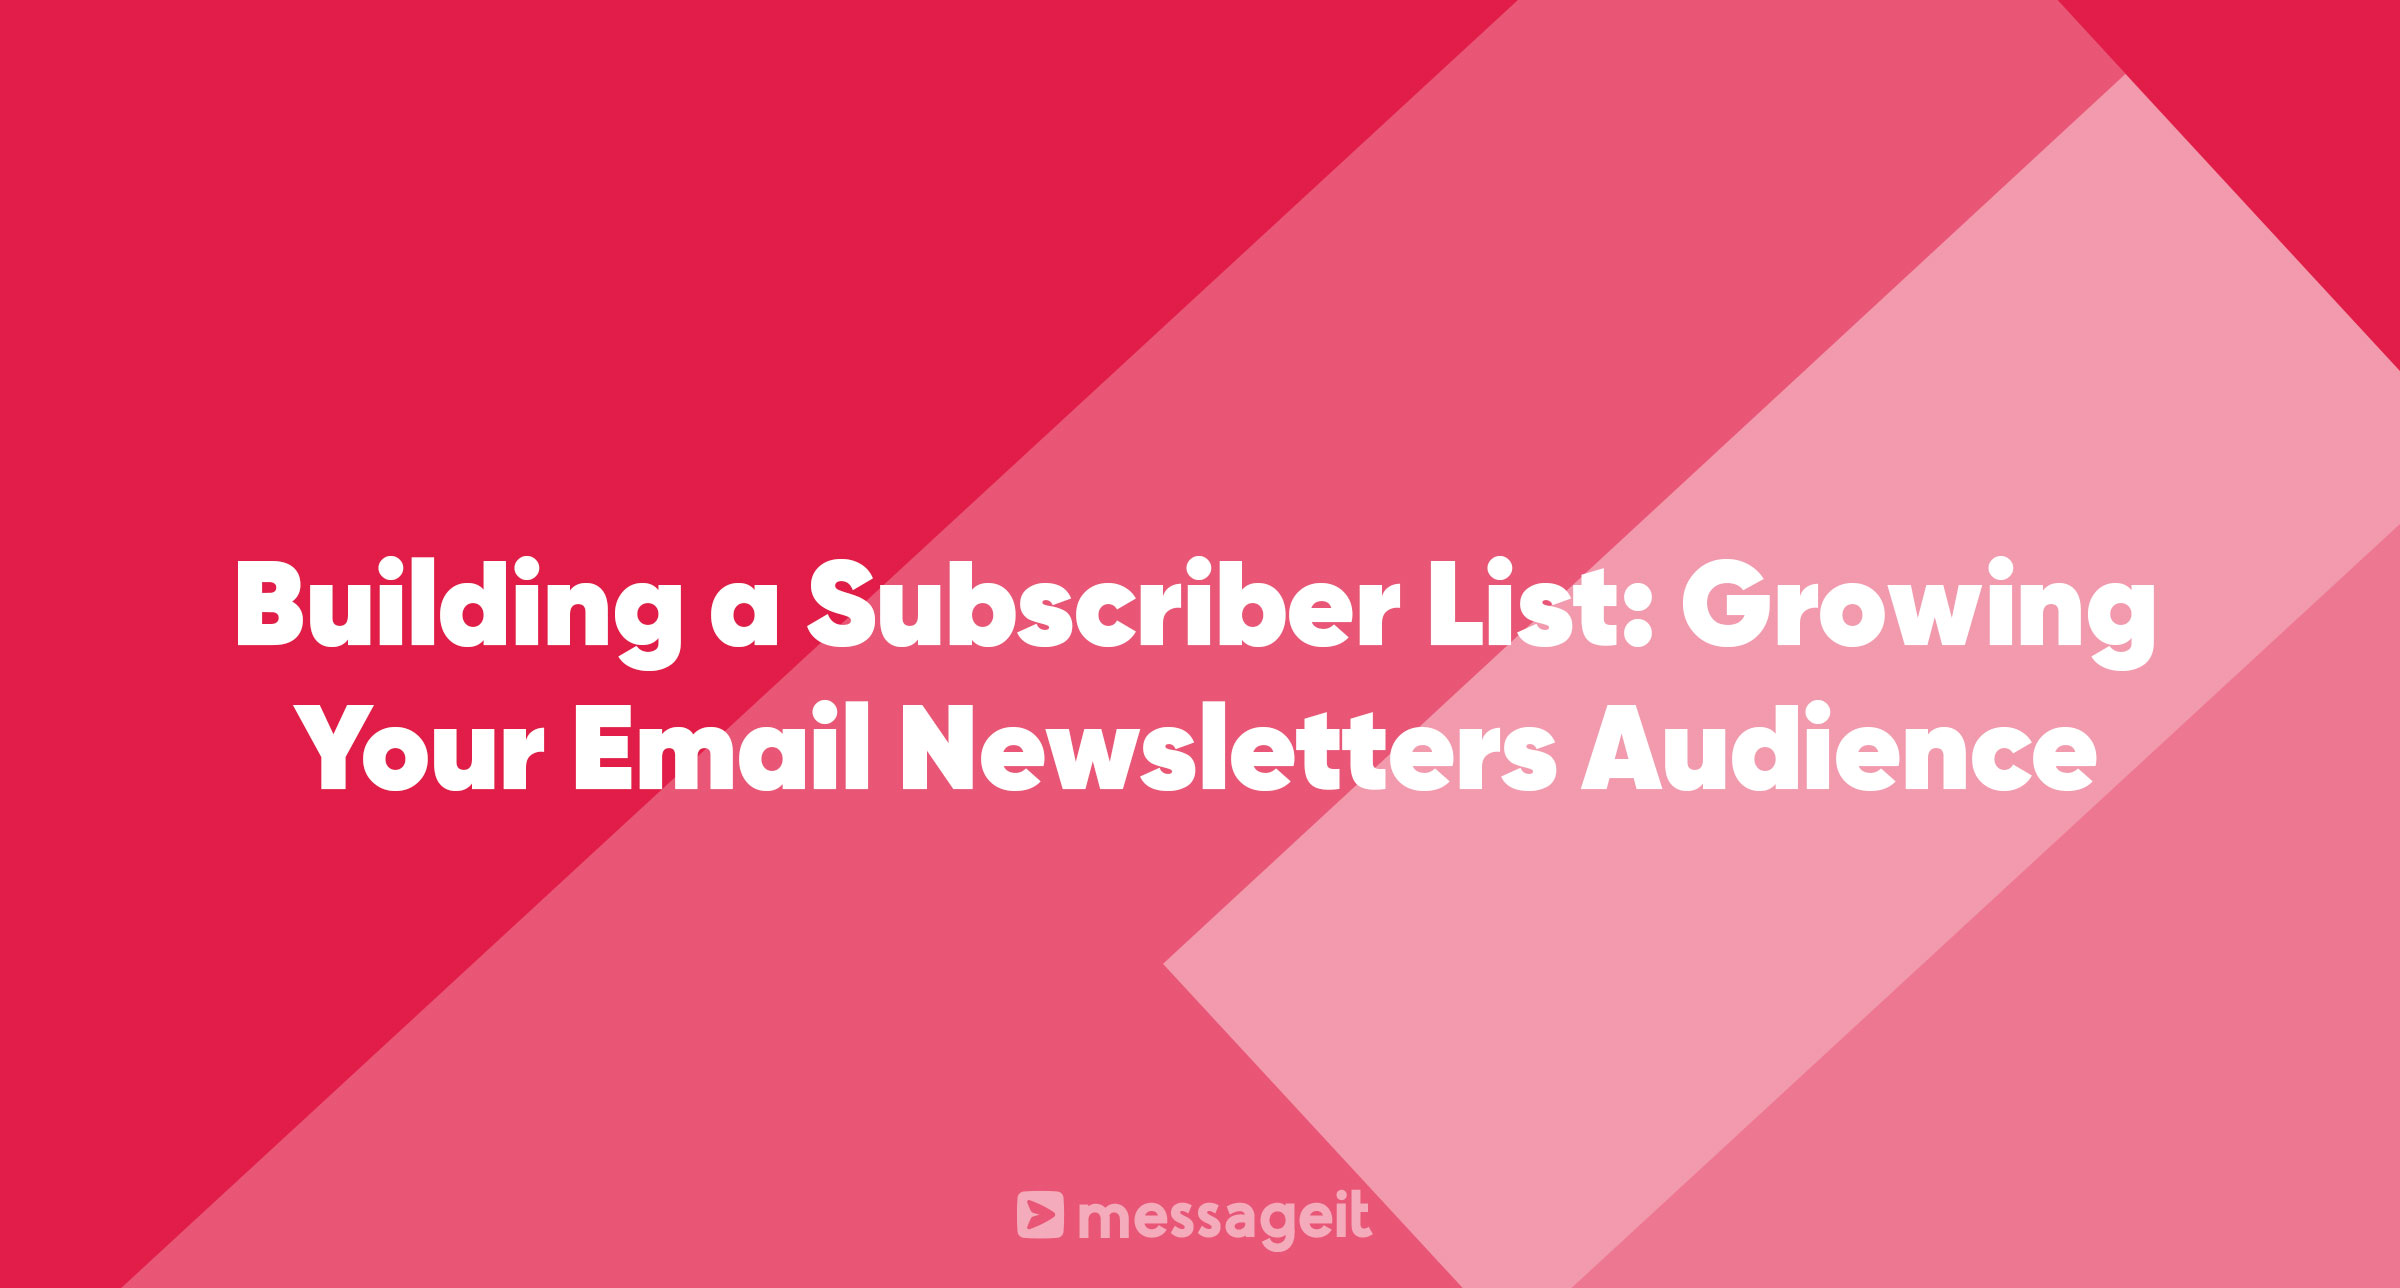 Article | Building a Subscriber List: Growing Your Email Newsletters Audience